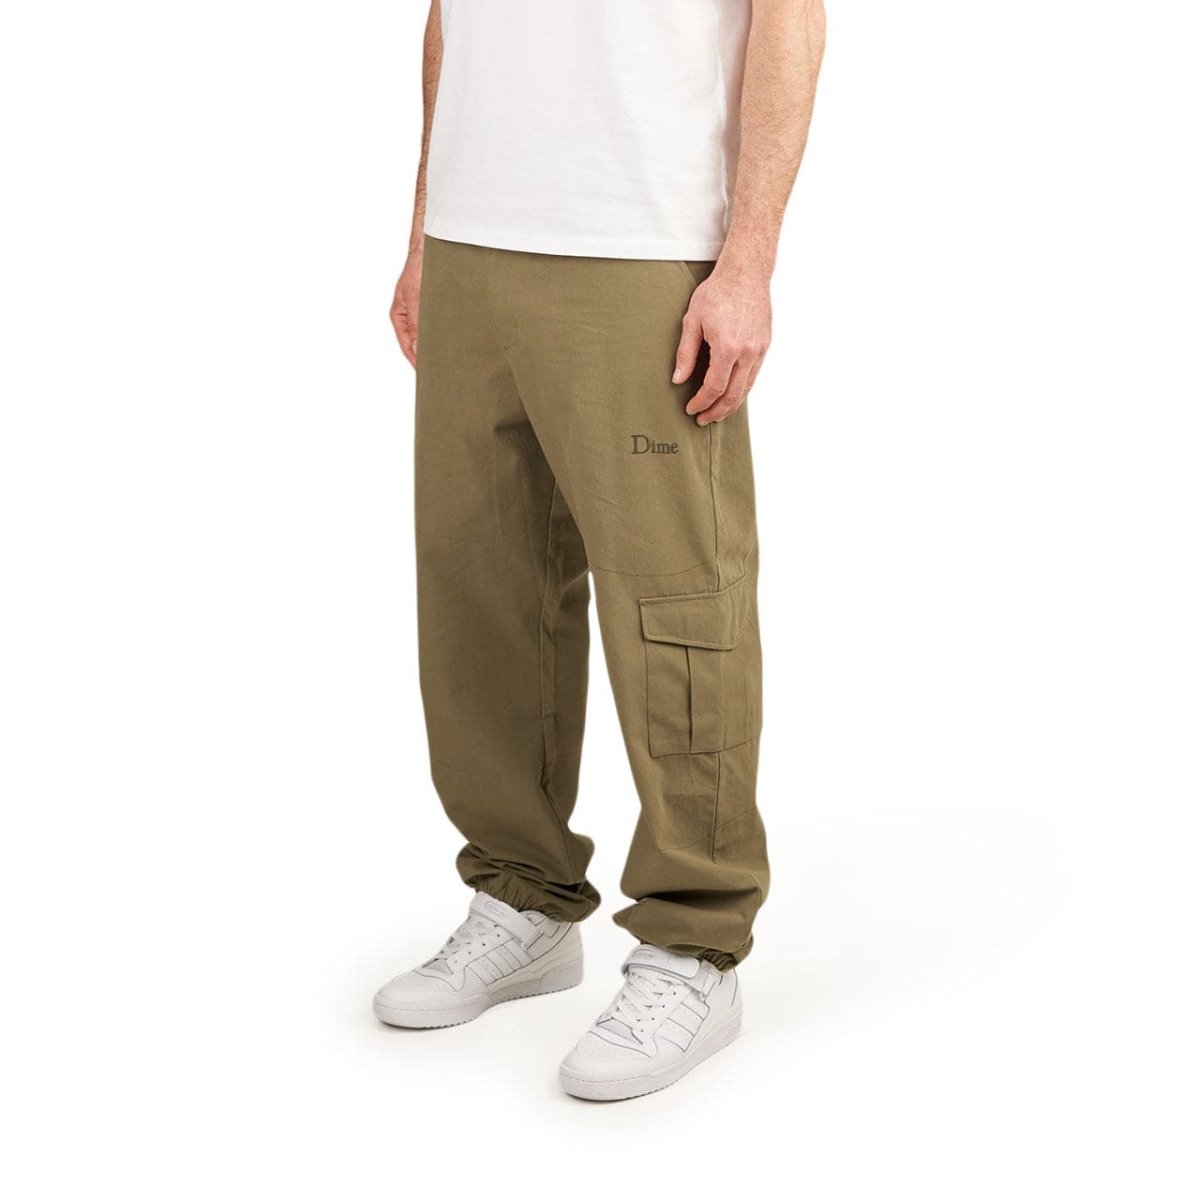 Dime Military I Know Pants (Olive)